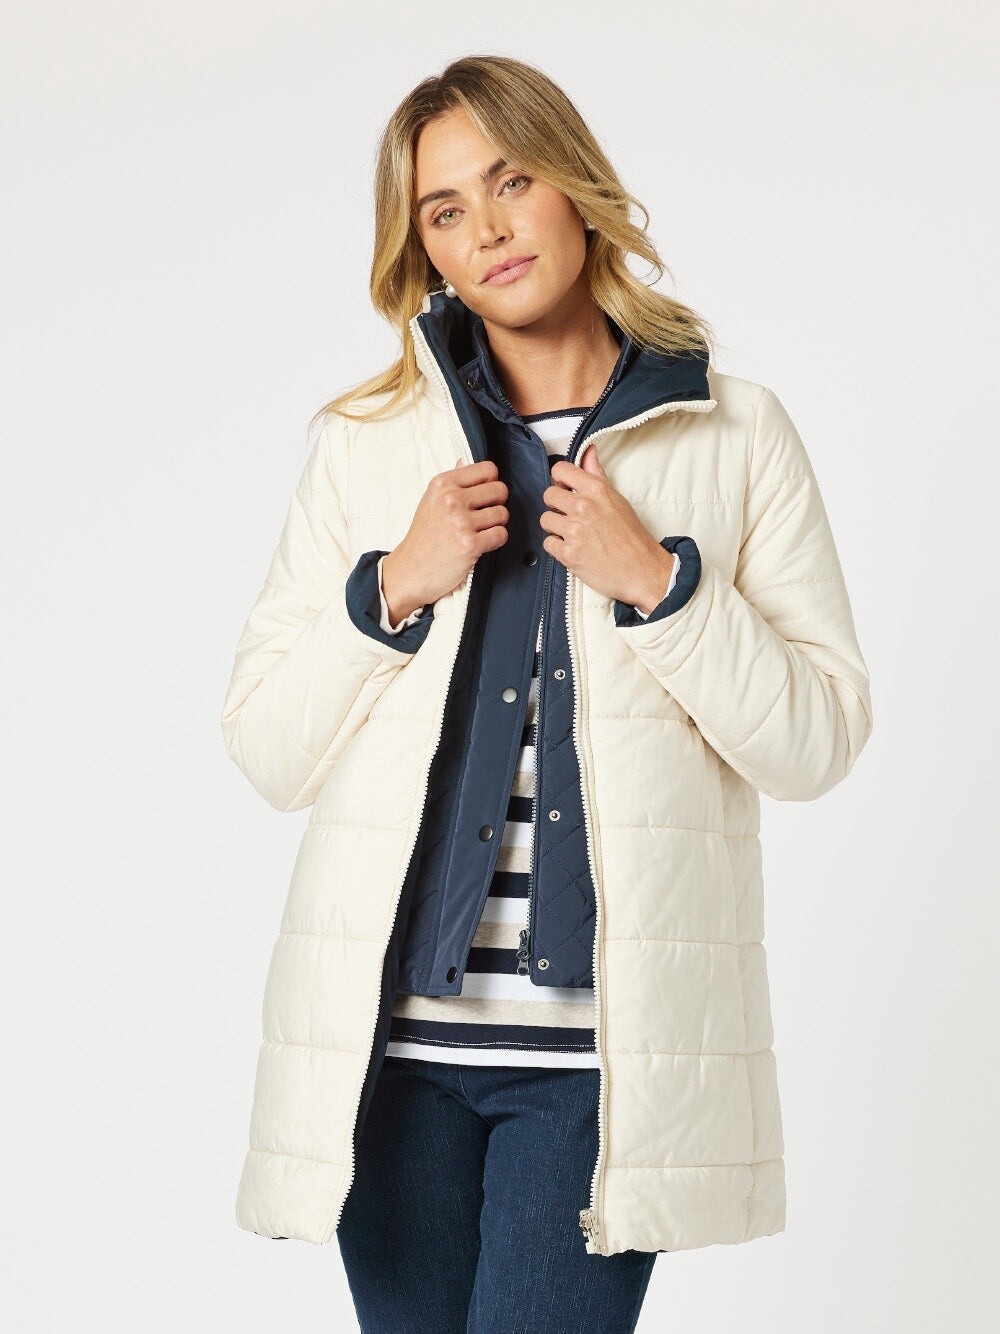 GS - Bowral Reversible Puffer Jacket Ivory - 44387, Size: 8